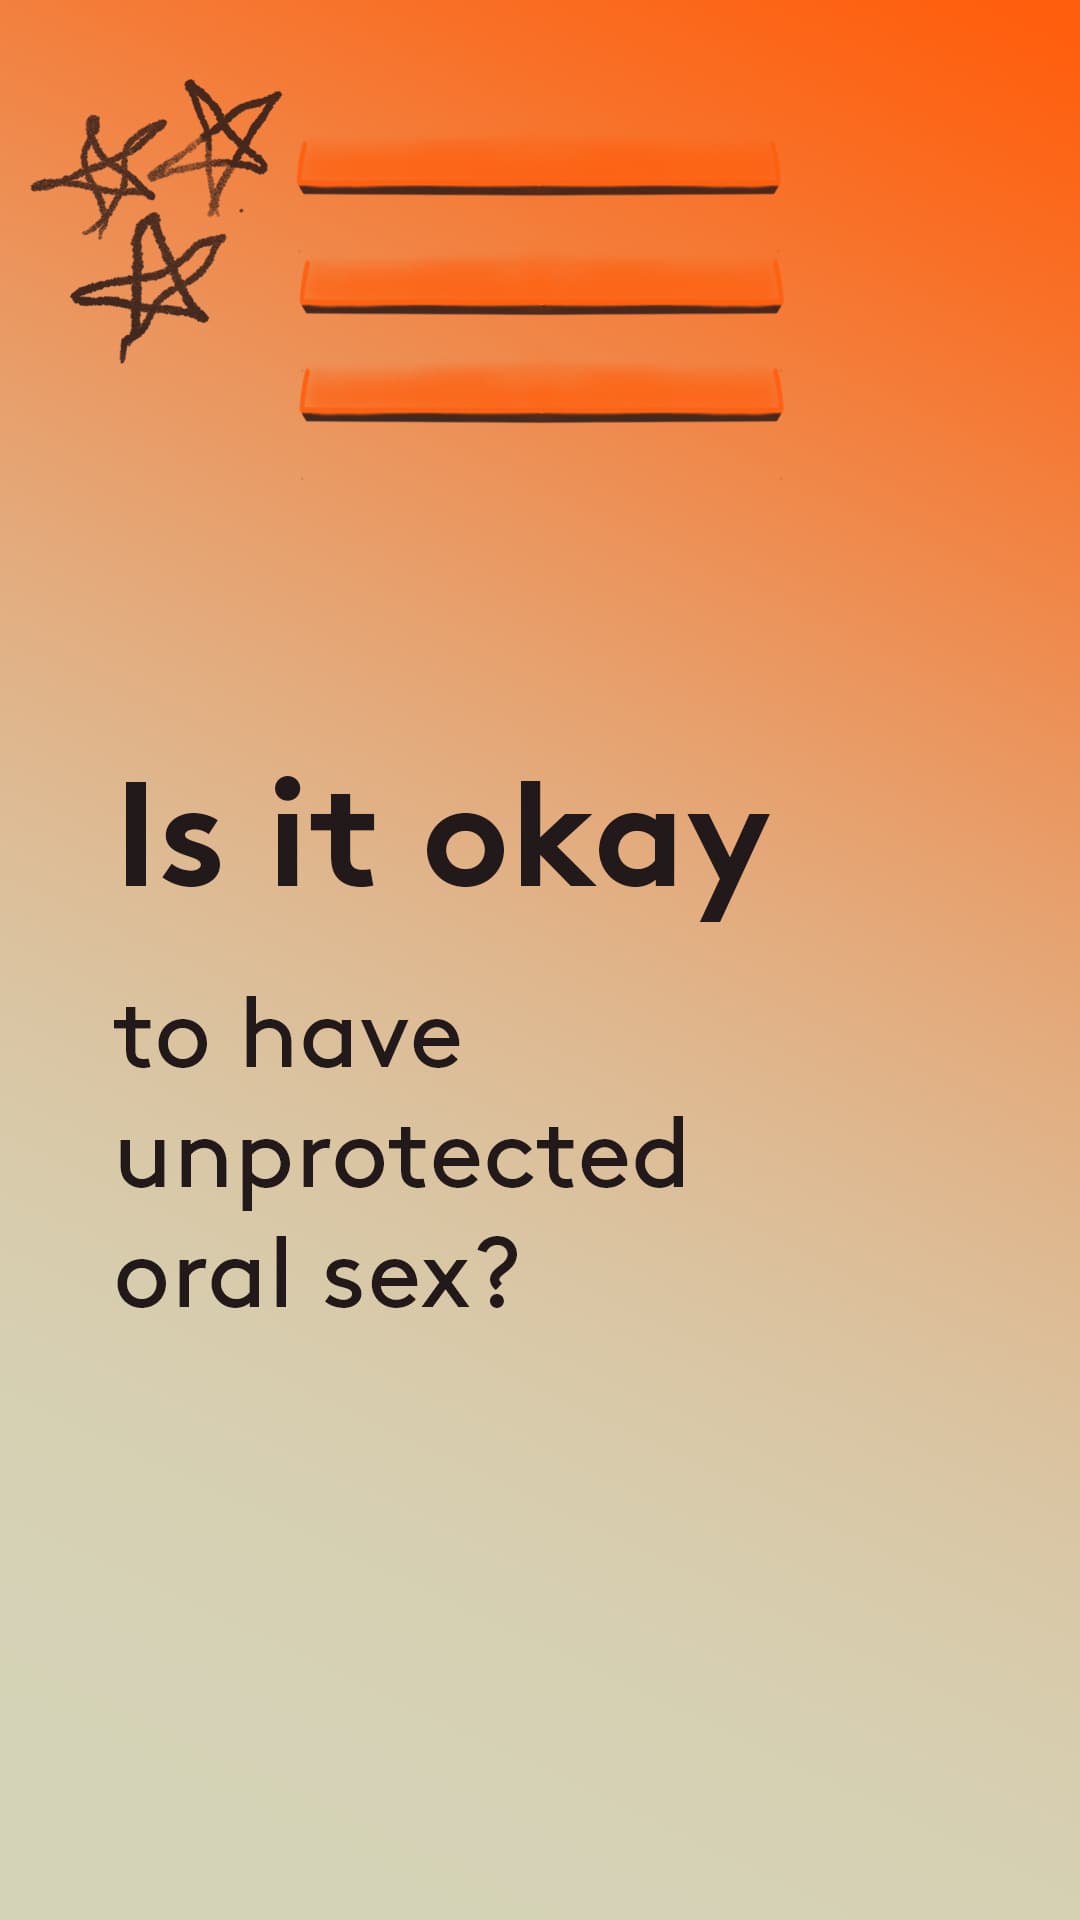 Is it okay to have unprotected oral sex?